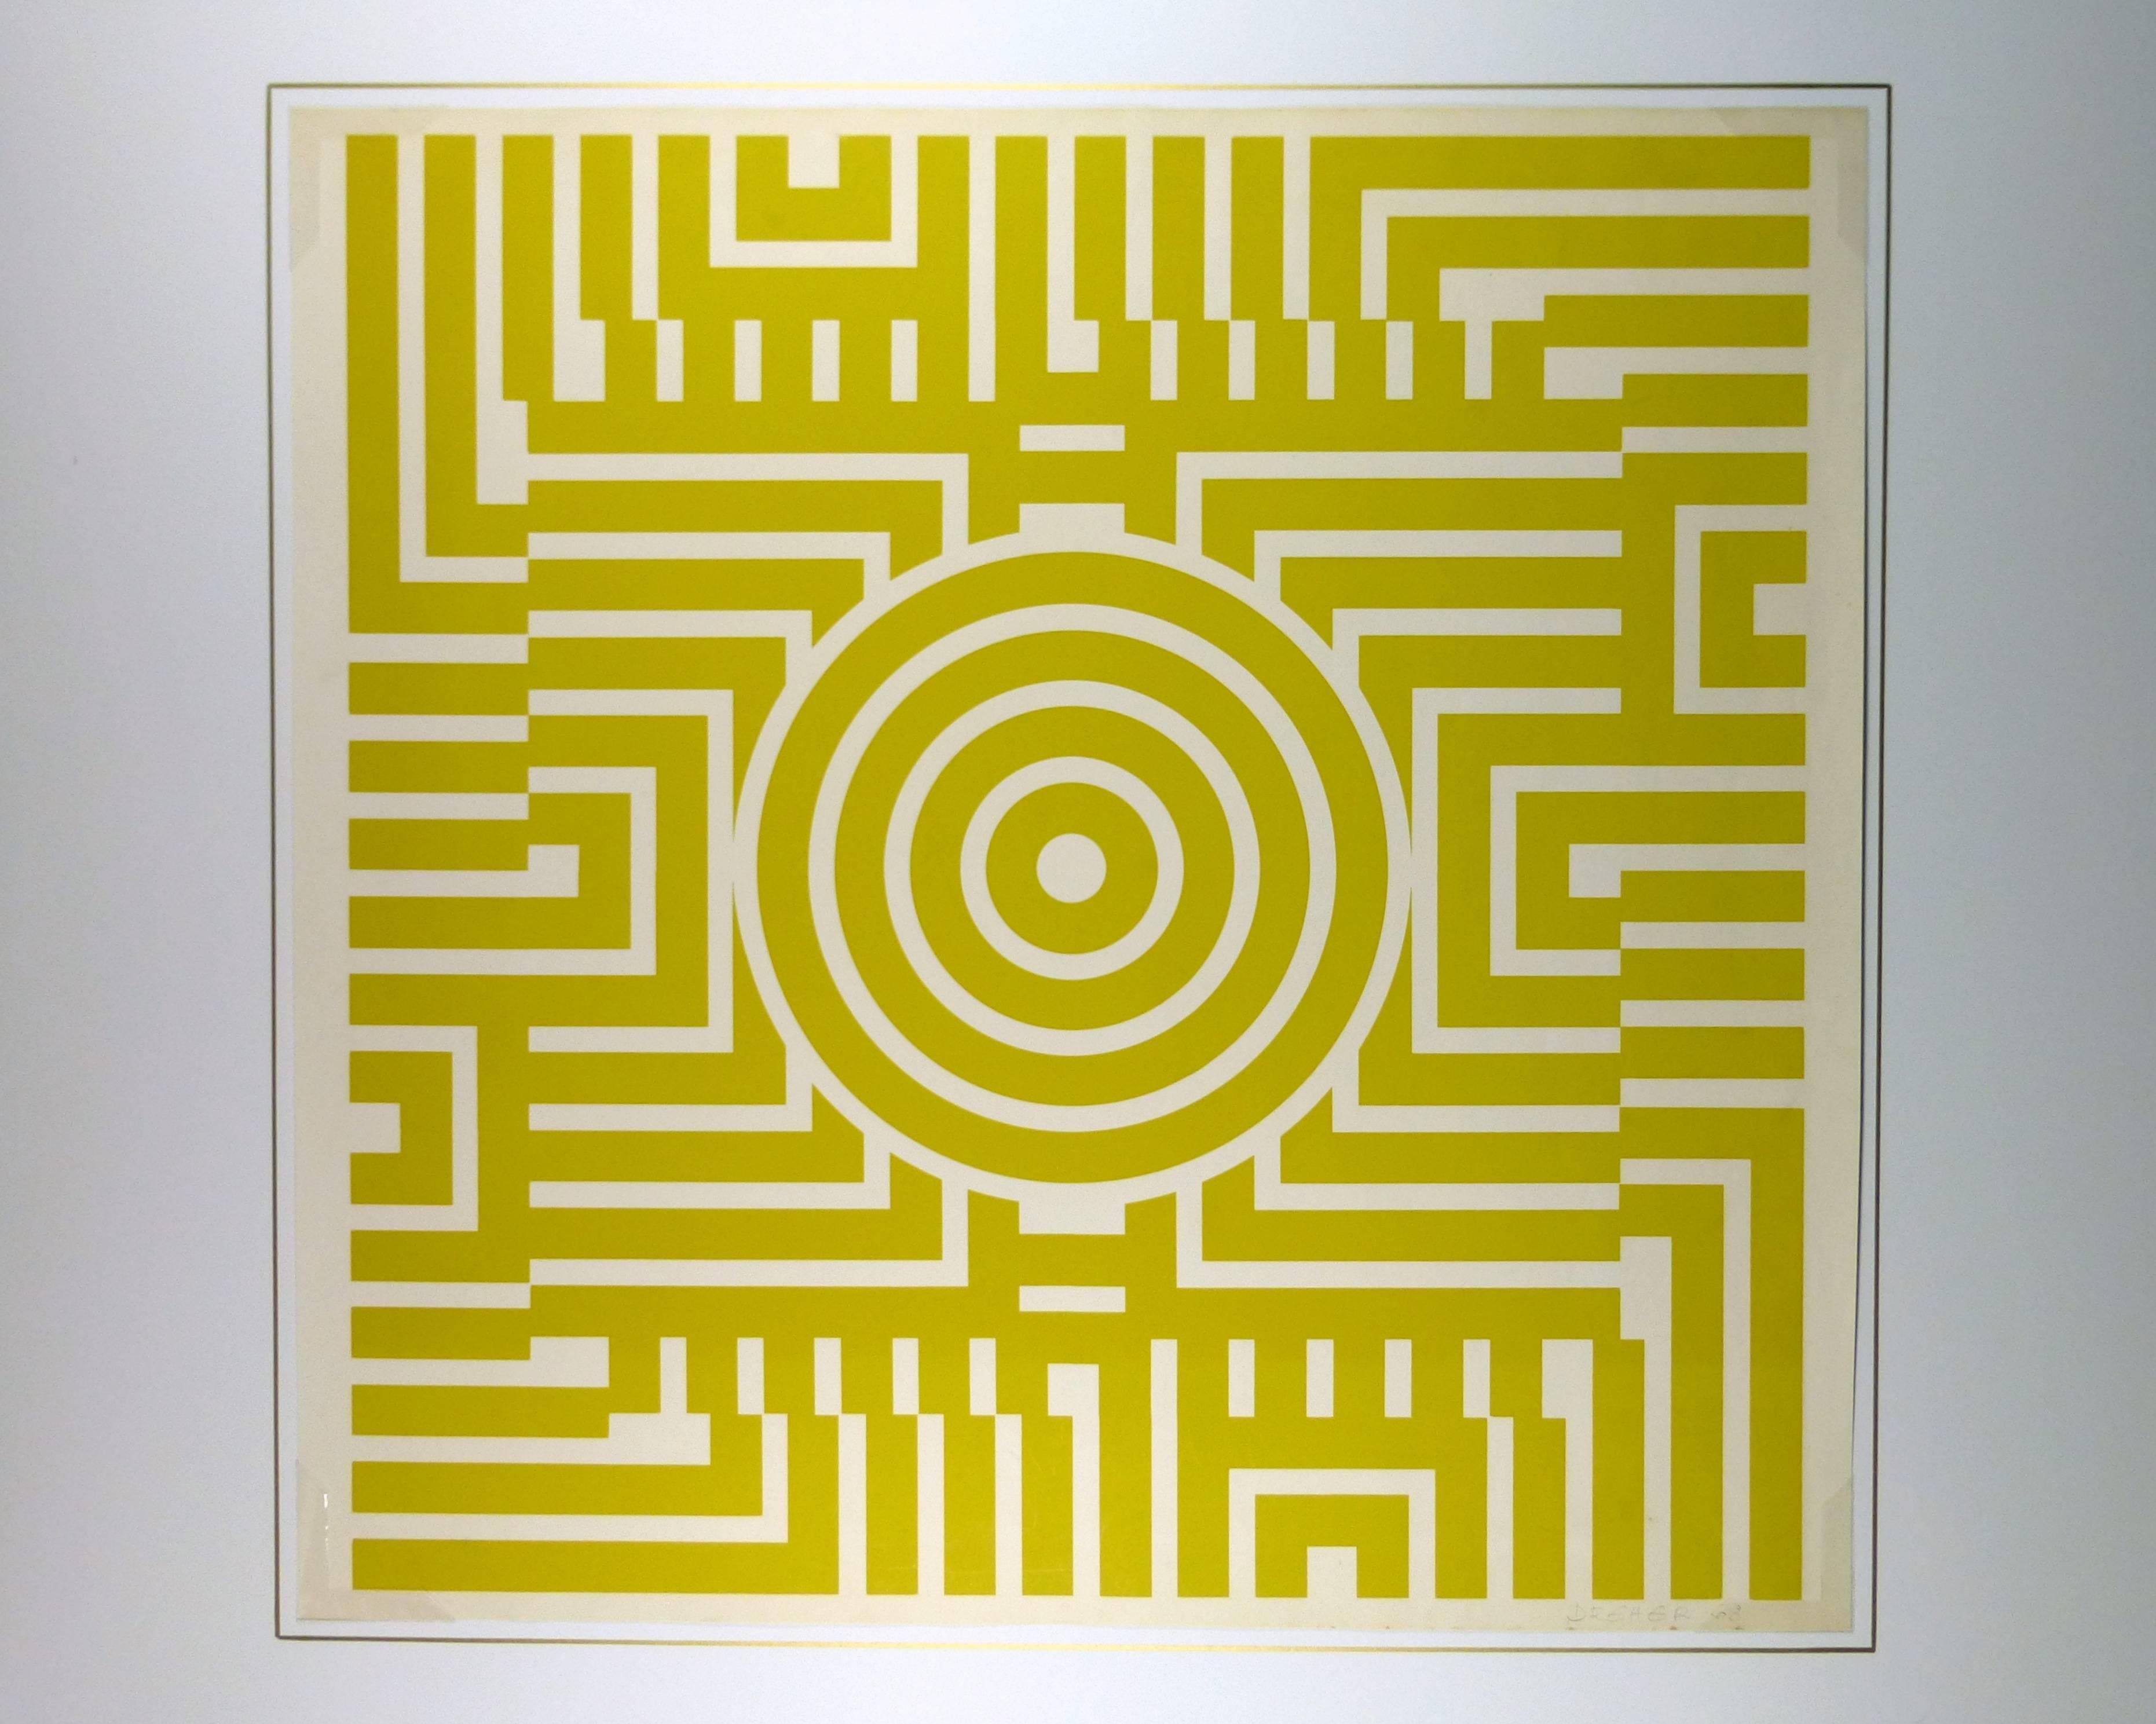 Bold yellow abstract maze serigraph by German artist Dreher, 1968. Signed lower right.  

Original artwork on paper displayed on a white mat with a gold border. Archival plastic sleeve and Certificate of Authenticity included. Artwork, 28.5"L x